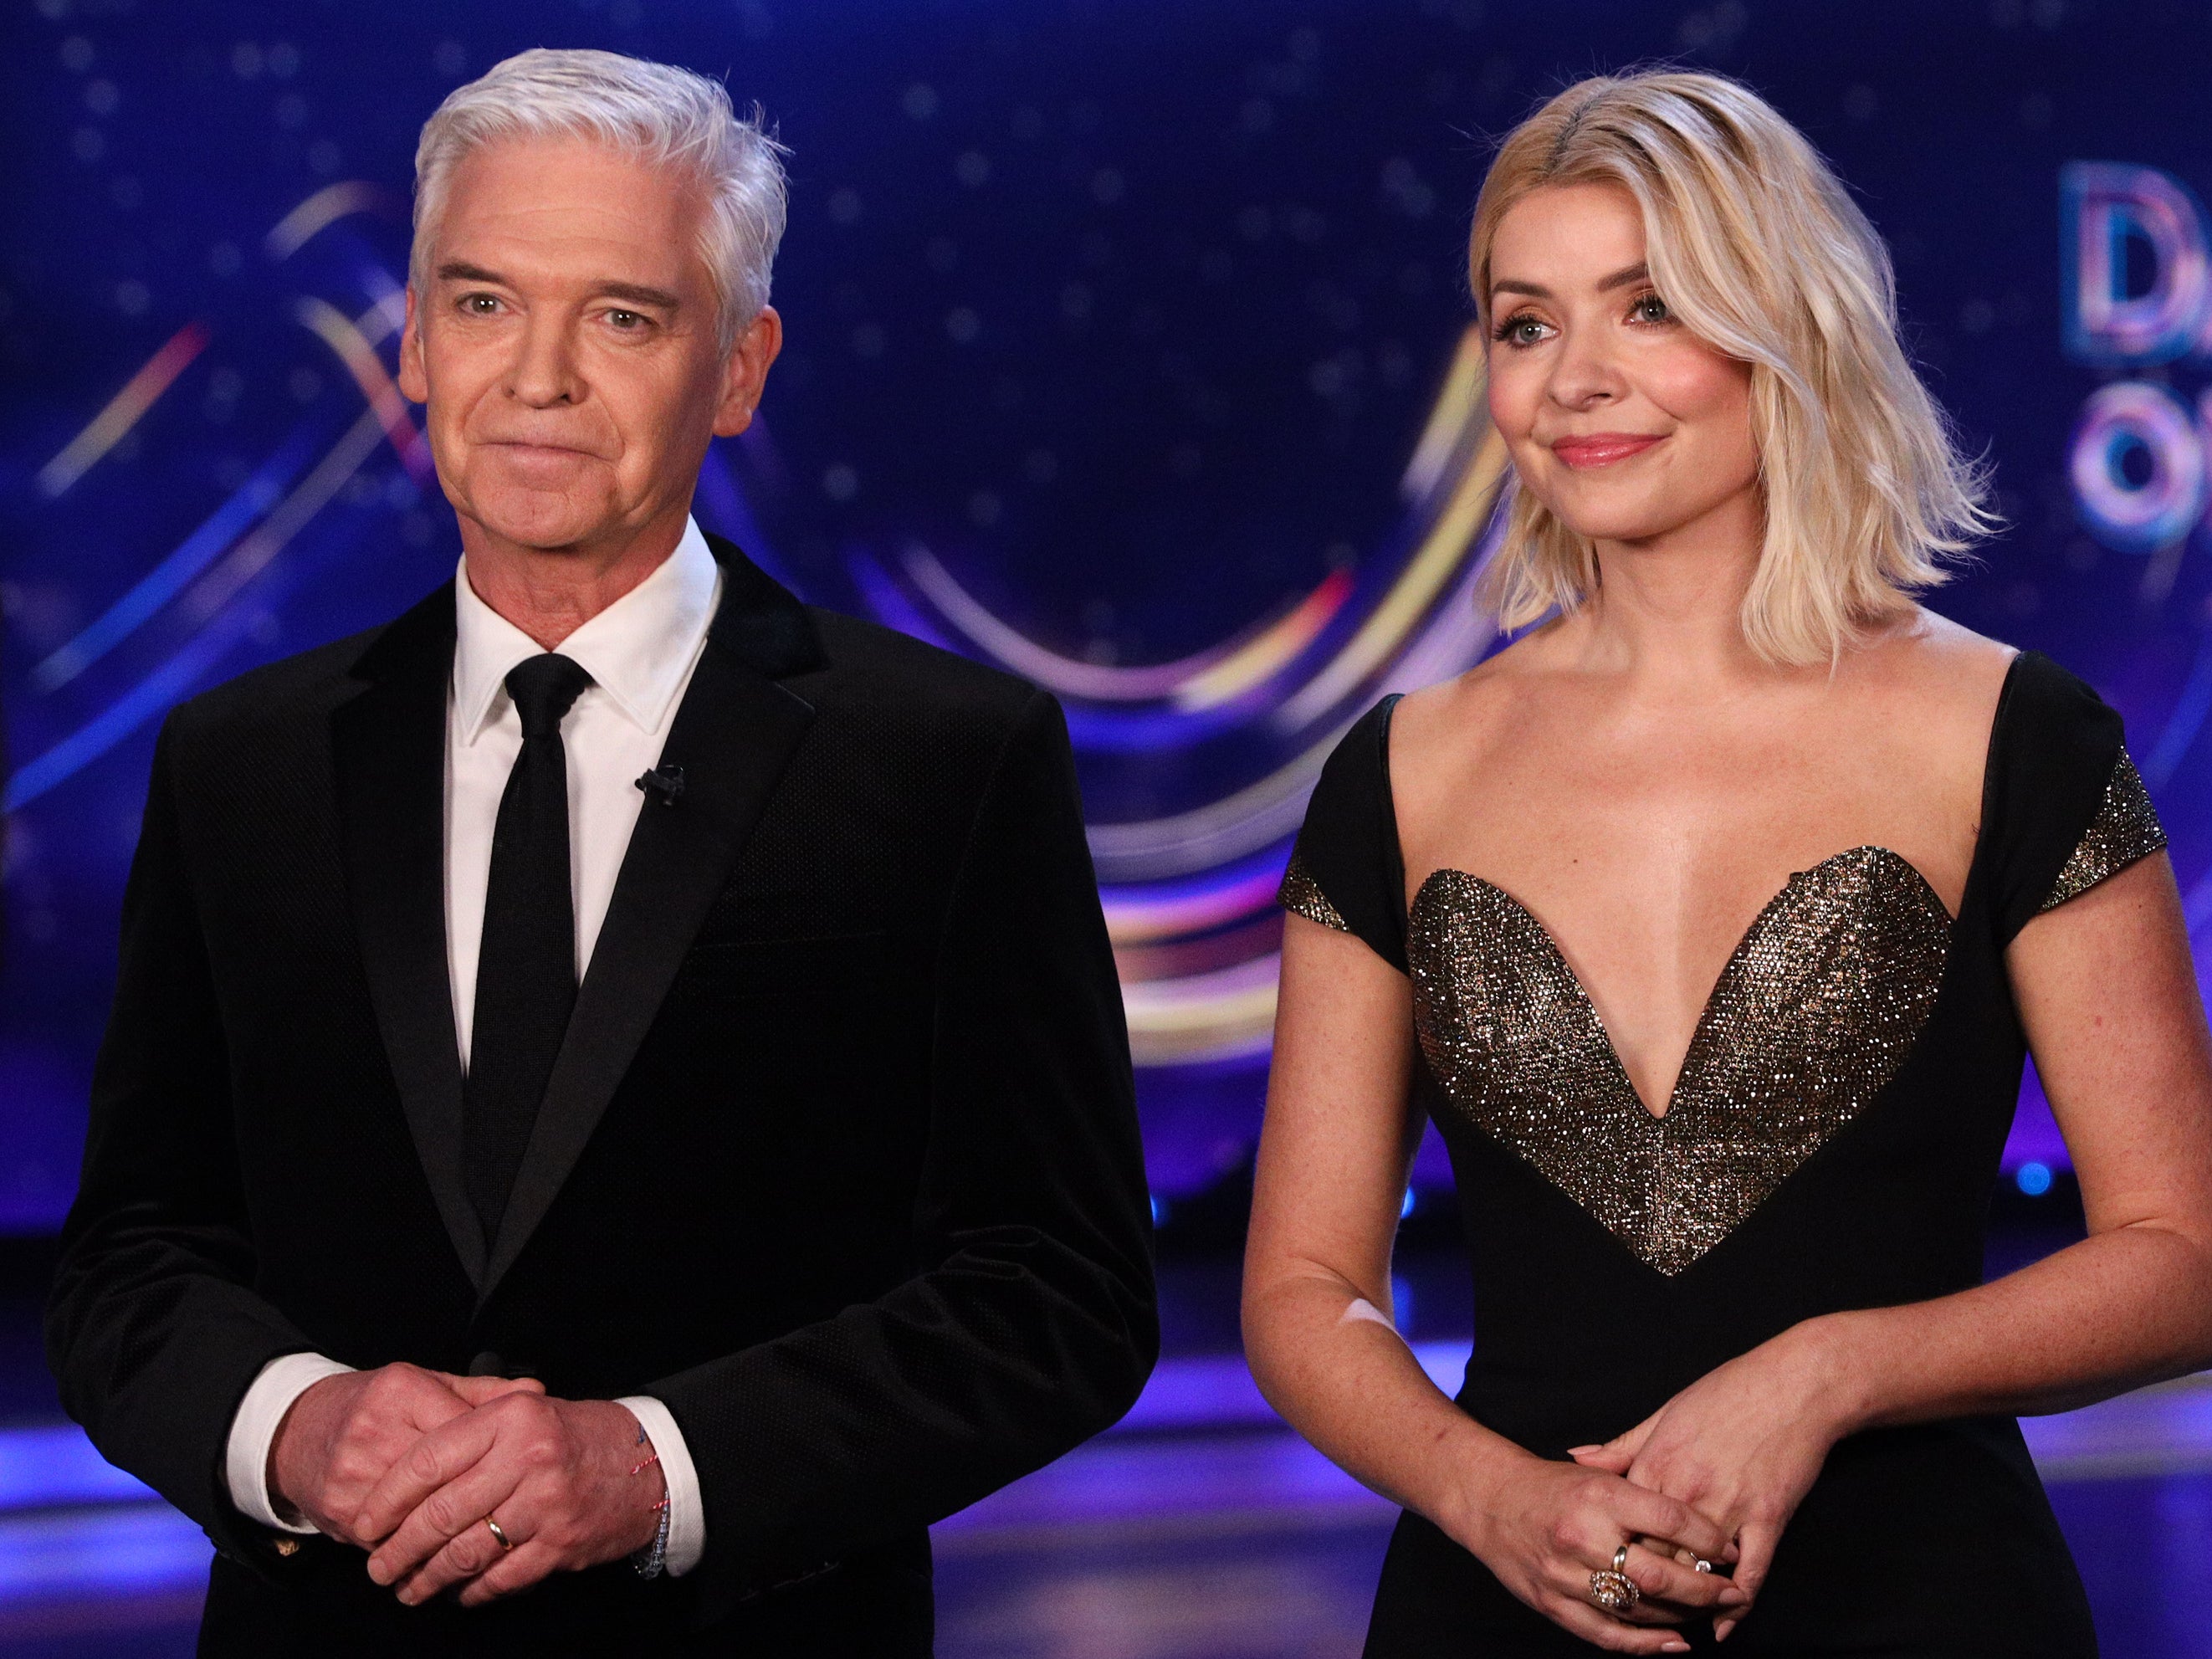 Phillip Schofield and Holly Willoughby on ‘Dancing on Ice'